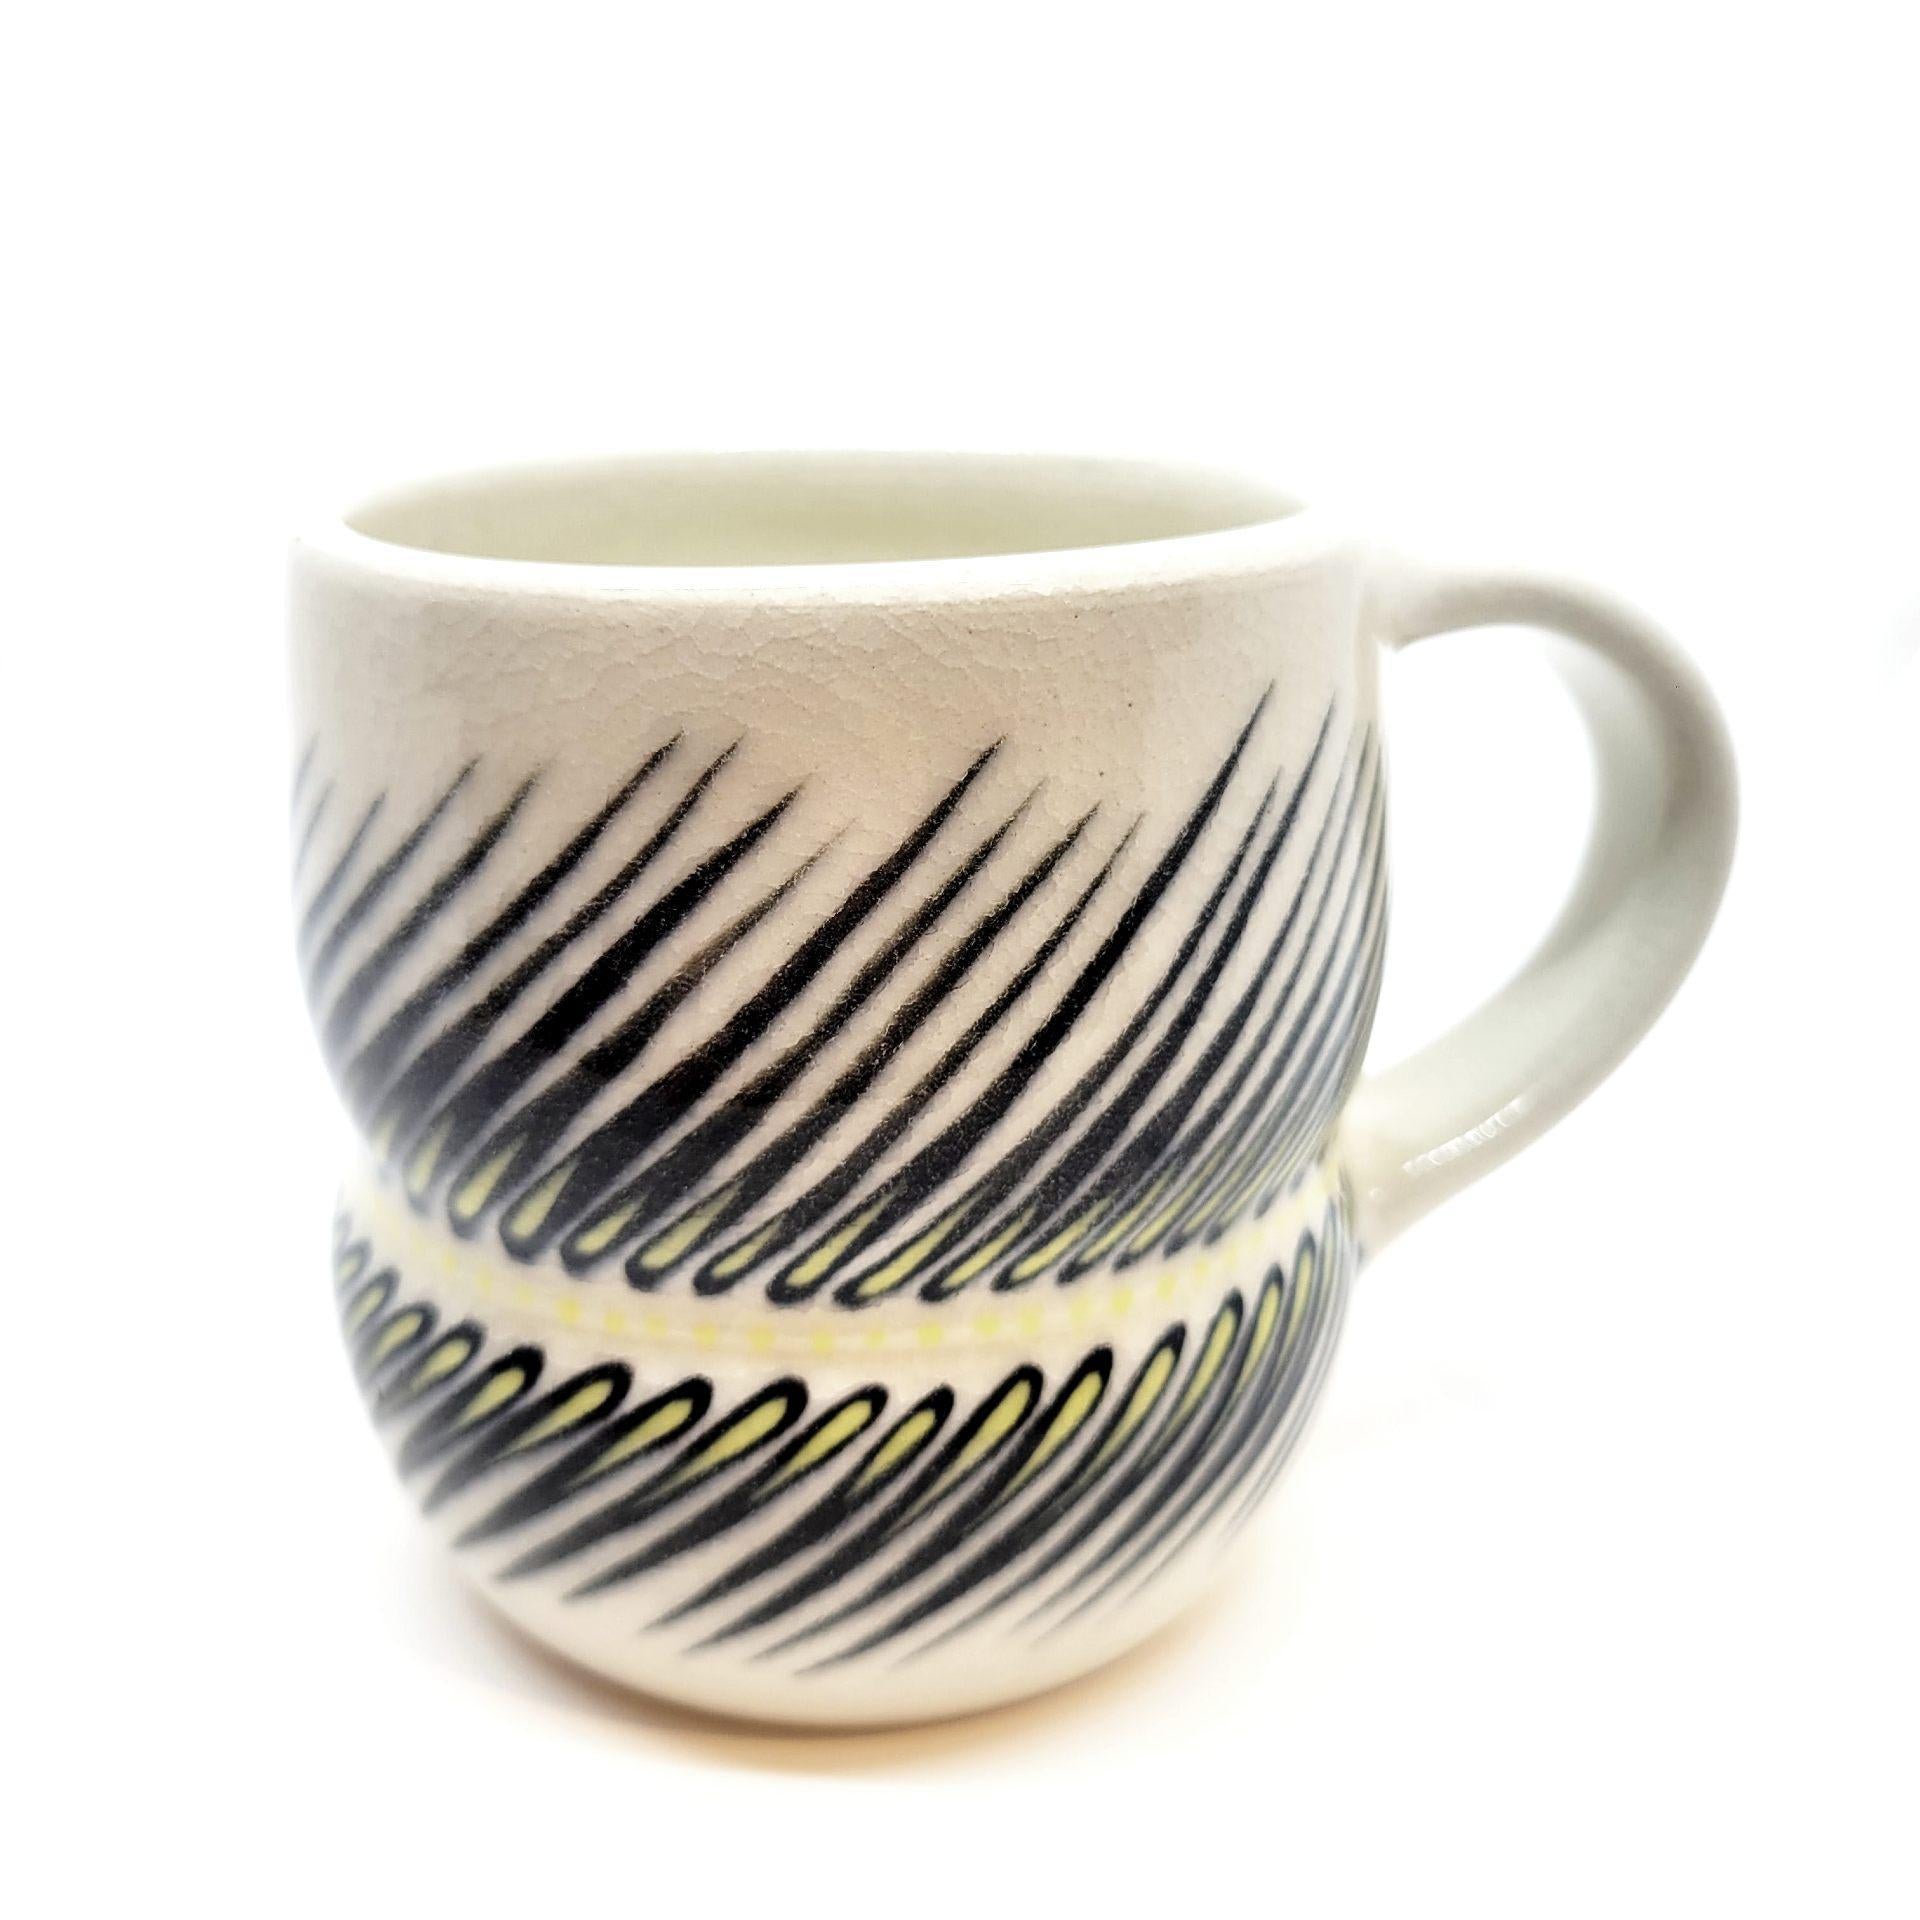 Mug - Small in Outward Diagonal Linear with Yellow Accents by Britt Dietrich Ceramics